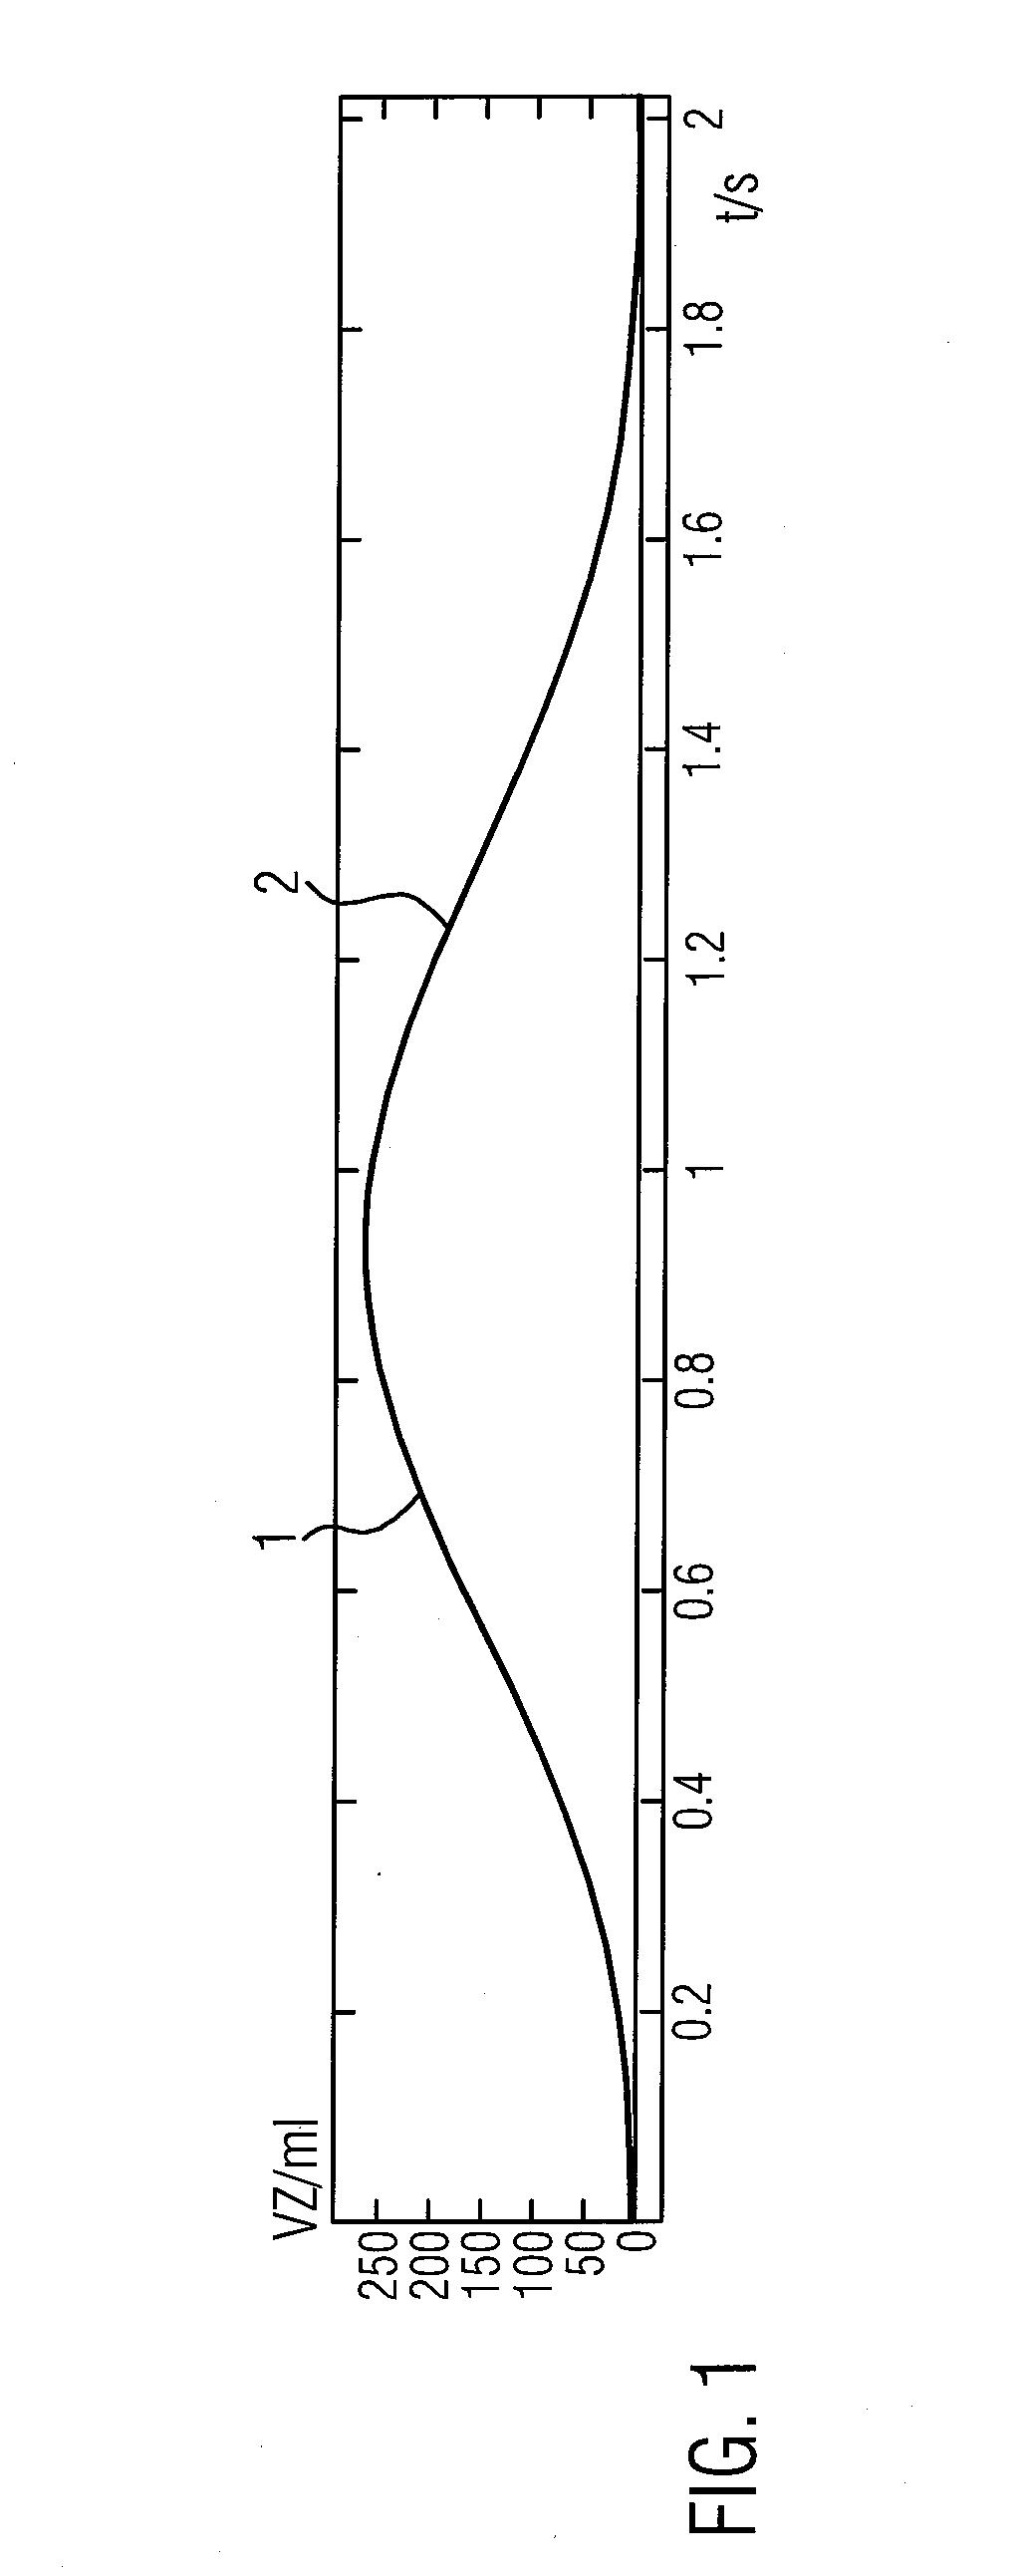 Electric impedance tomography device and method